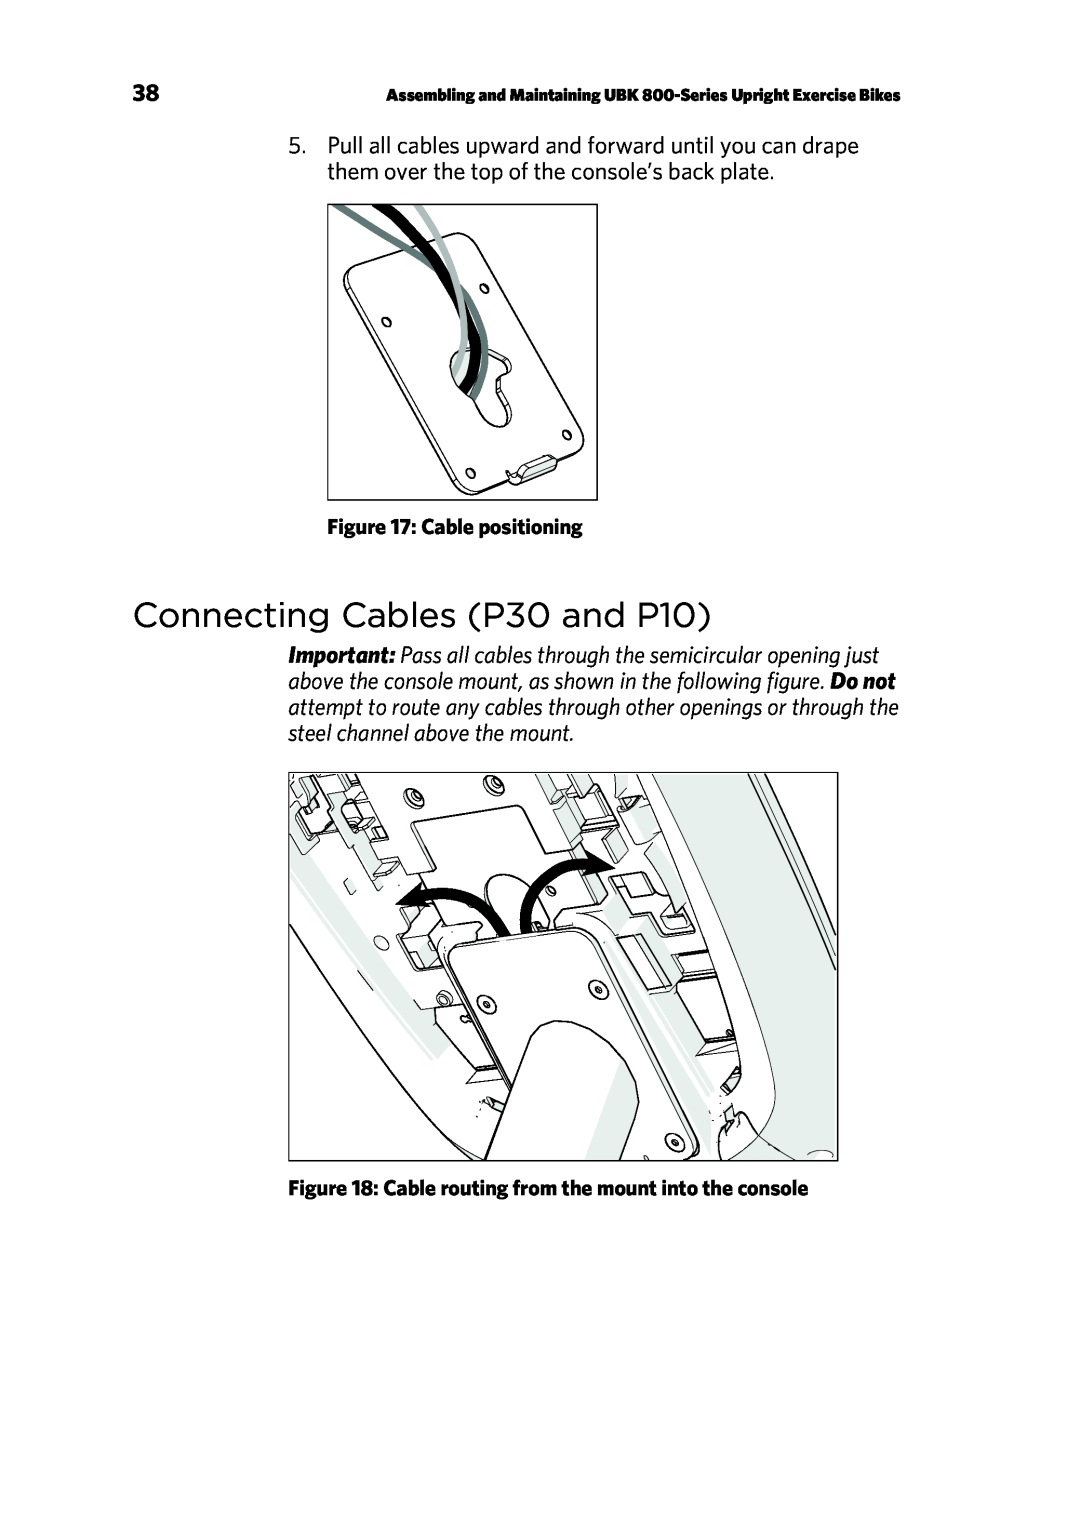 Precor manual Connecting Cables P30 and P10, Cable positioning, Cable routing from the mount into the console 